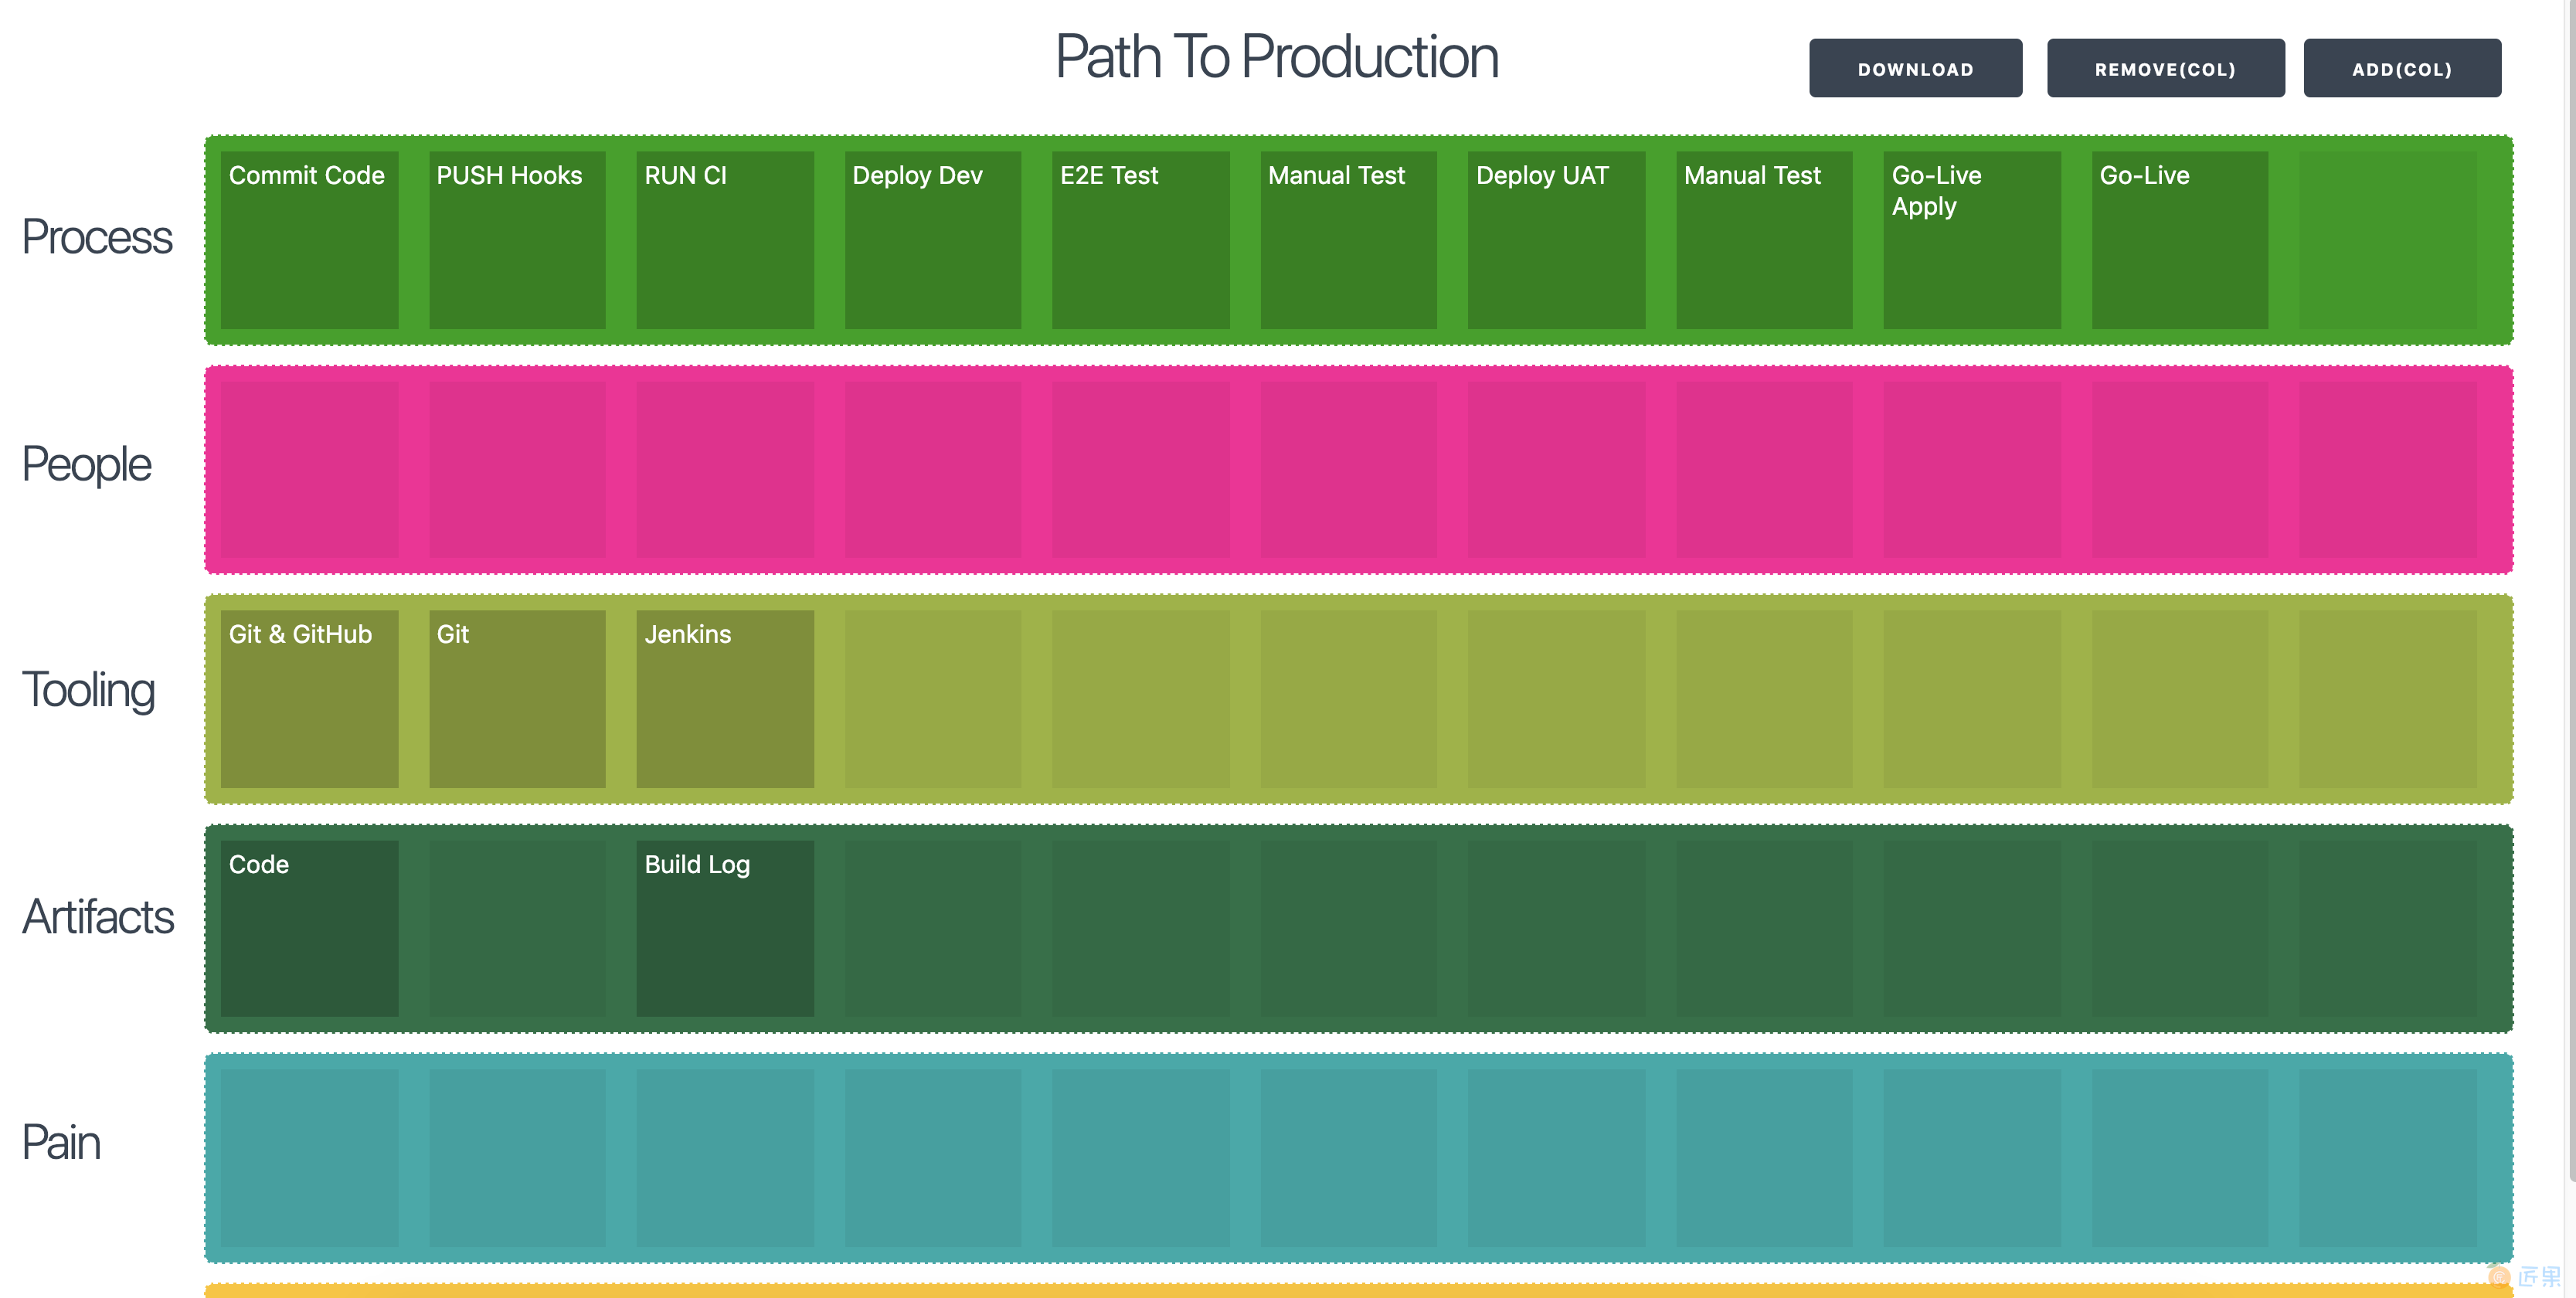 Path to Production